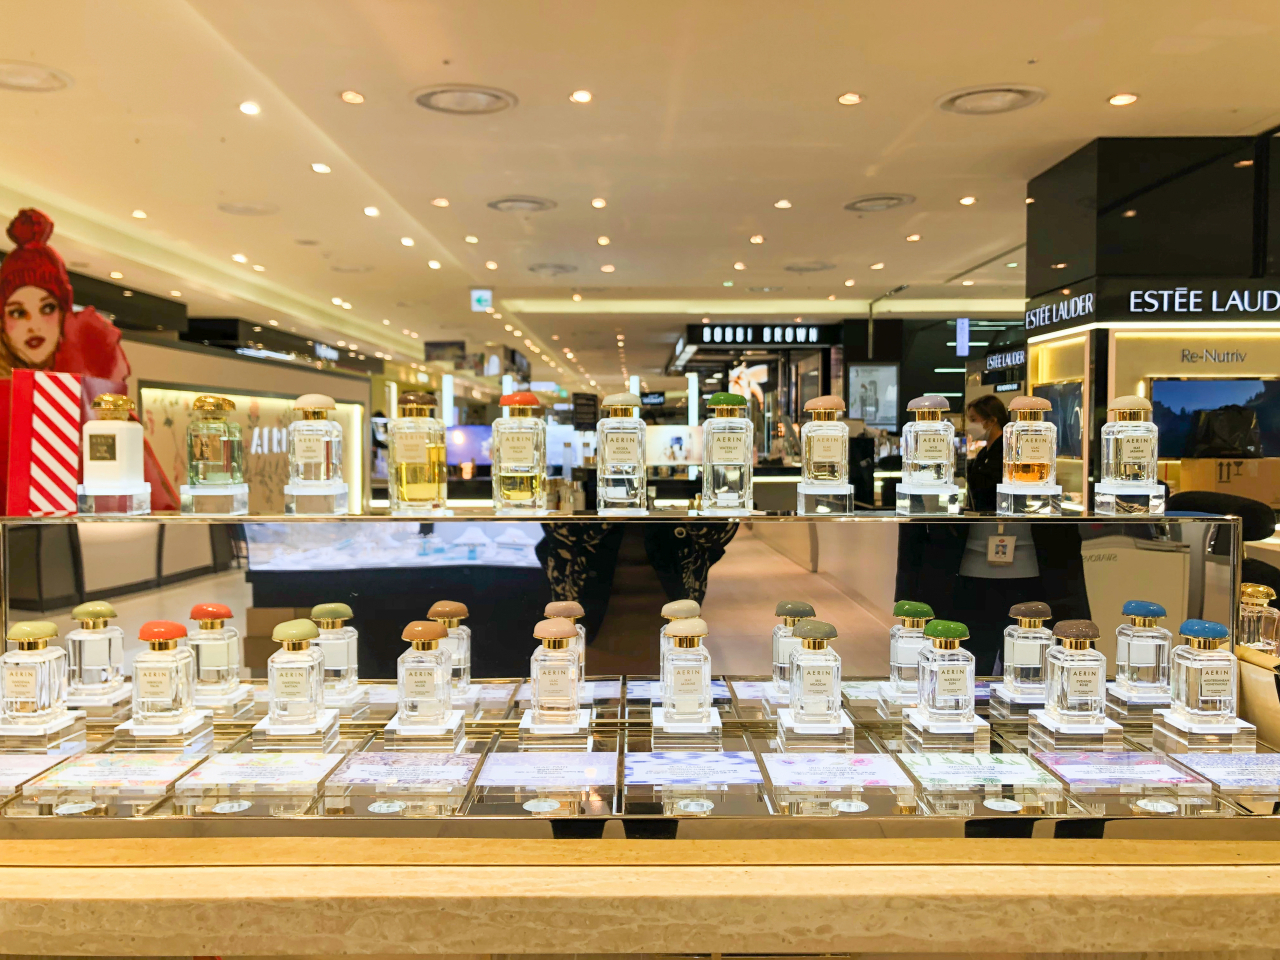 Perfumes are displayed at a Lotte Department Store in Seoul. (Lotte Department Store)